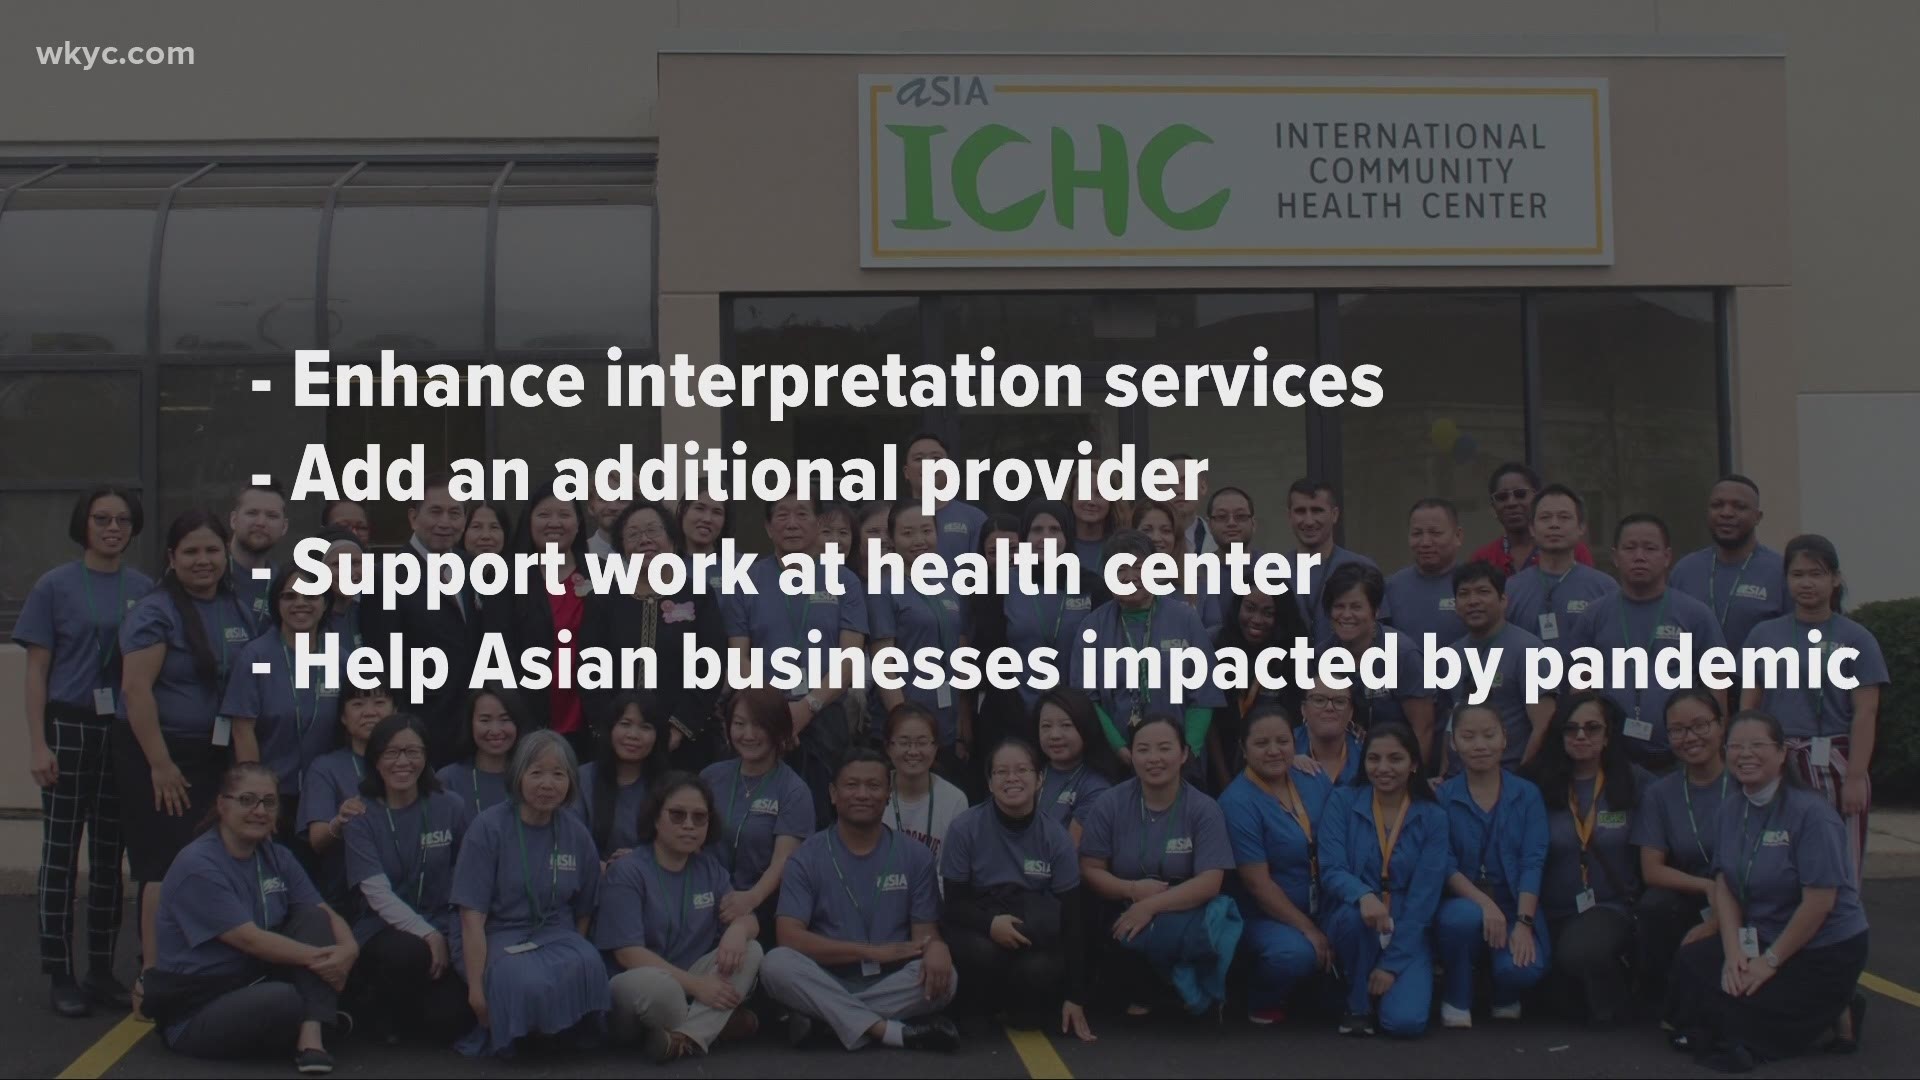 Asian Services in Action (ASIA) is a non-profit organization that serves the immigrant and refugee population in Northeast Ohio. Monica Robins has the story.